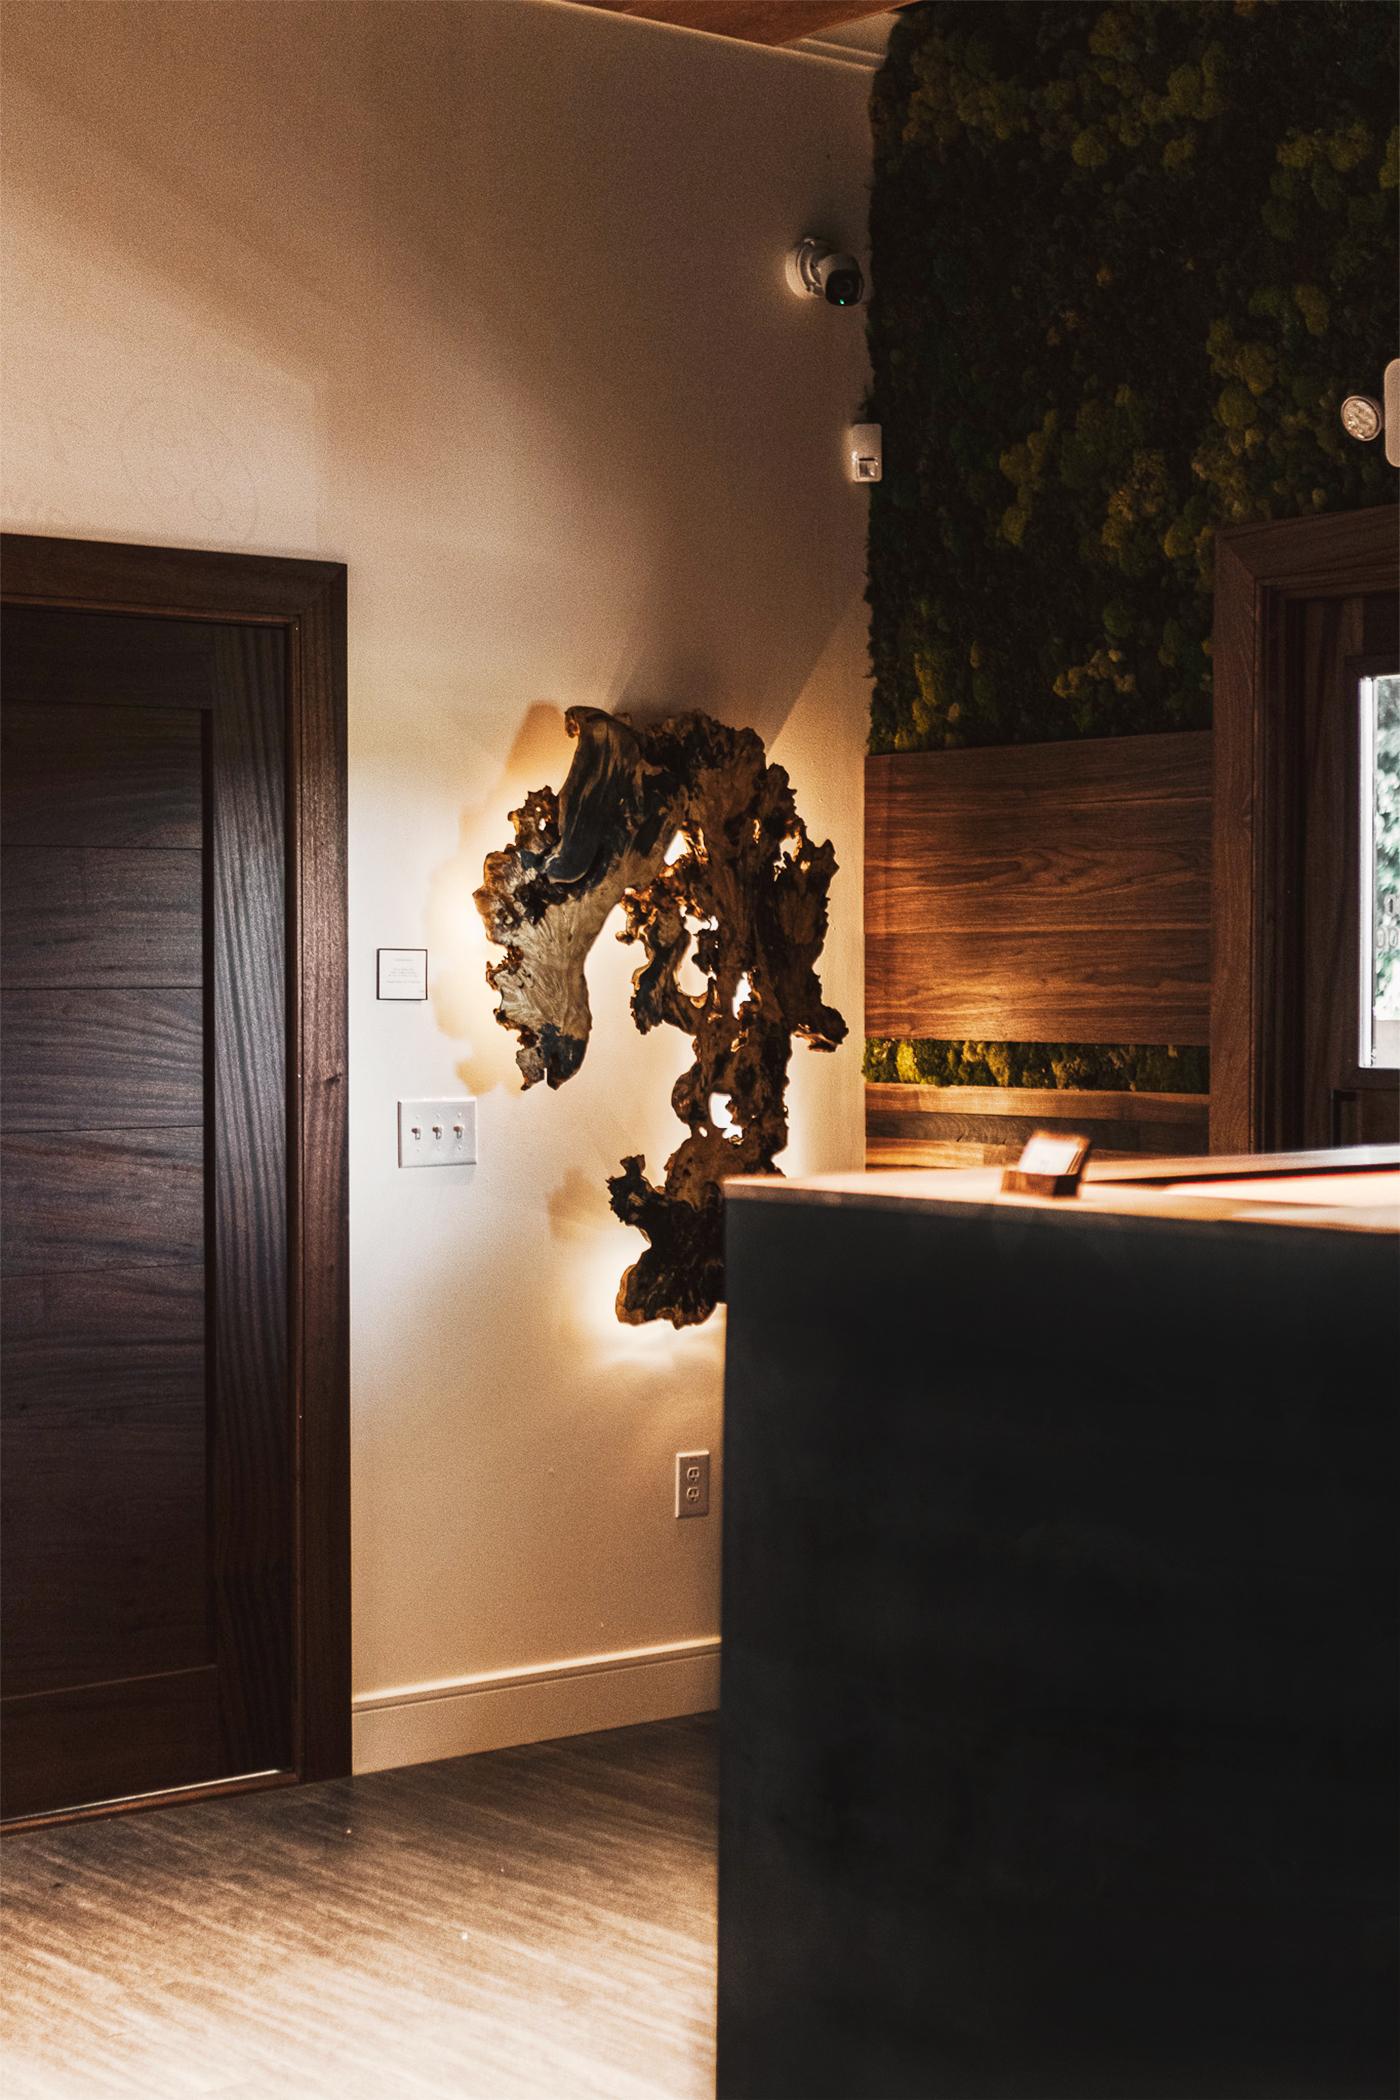 Floating Buckeye Burl Wall Art with Integrated Philips Hue LED Backlight

This stunning Buckeye Root Burl was sourced from northern California. The material was slabbed and air dried for 2 years, before entering the kiln for 30 days to ensure the